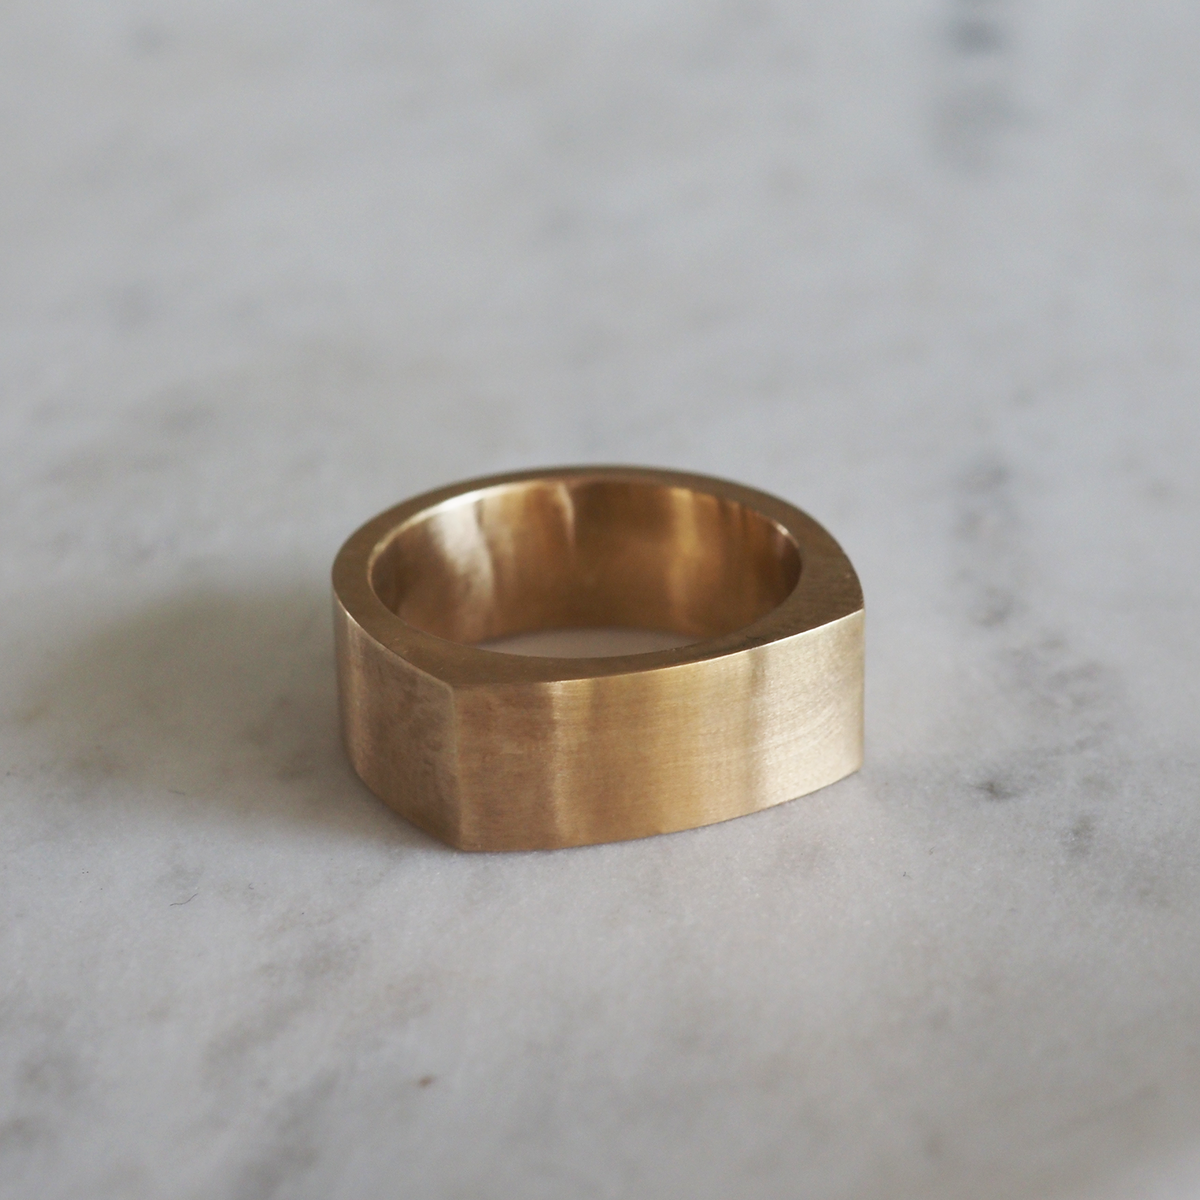 A modern flat top wedding band, designed for comfort and simplicity in 9ct yellow gold 